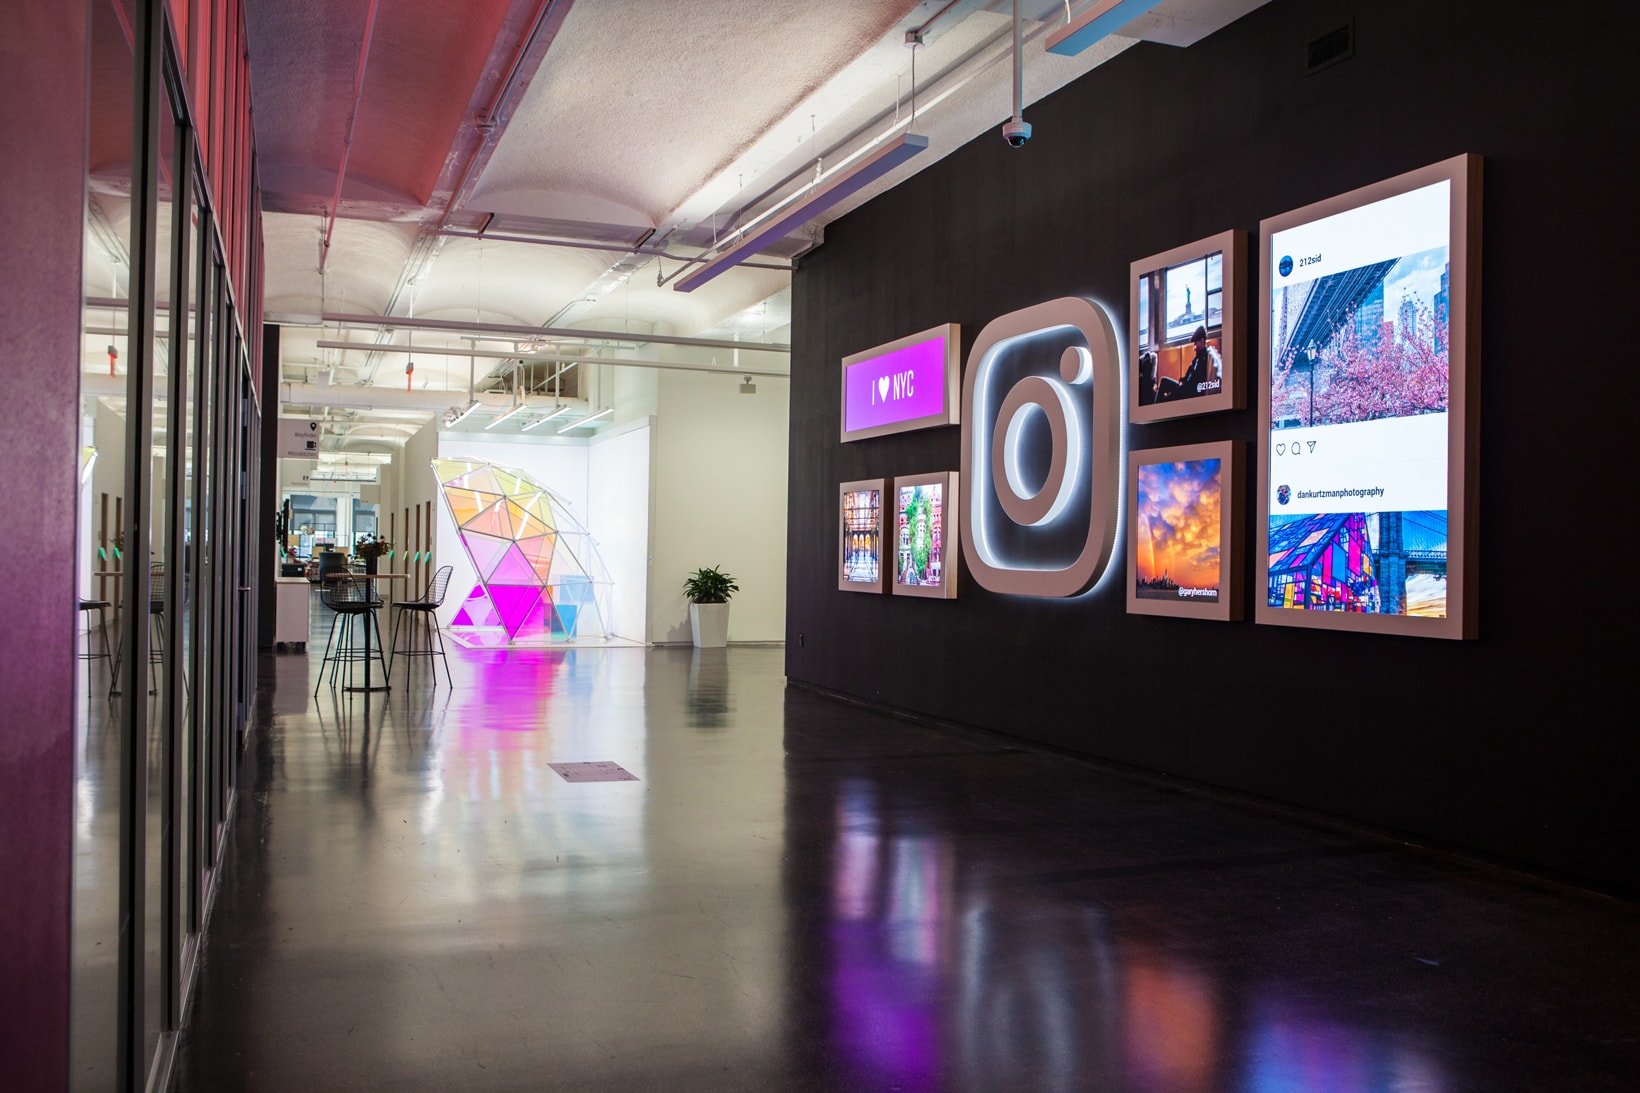 Instagram New York City Office First Look Entrance Digital Greeting Wall